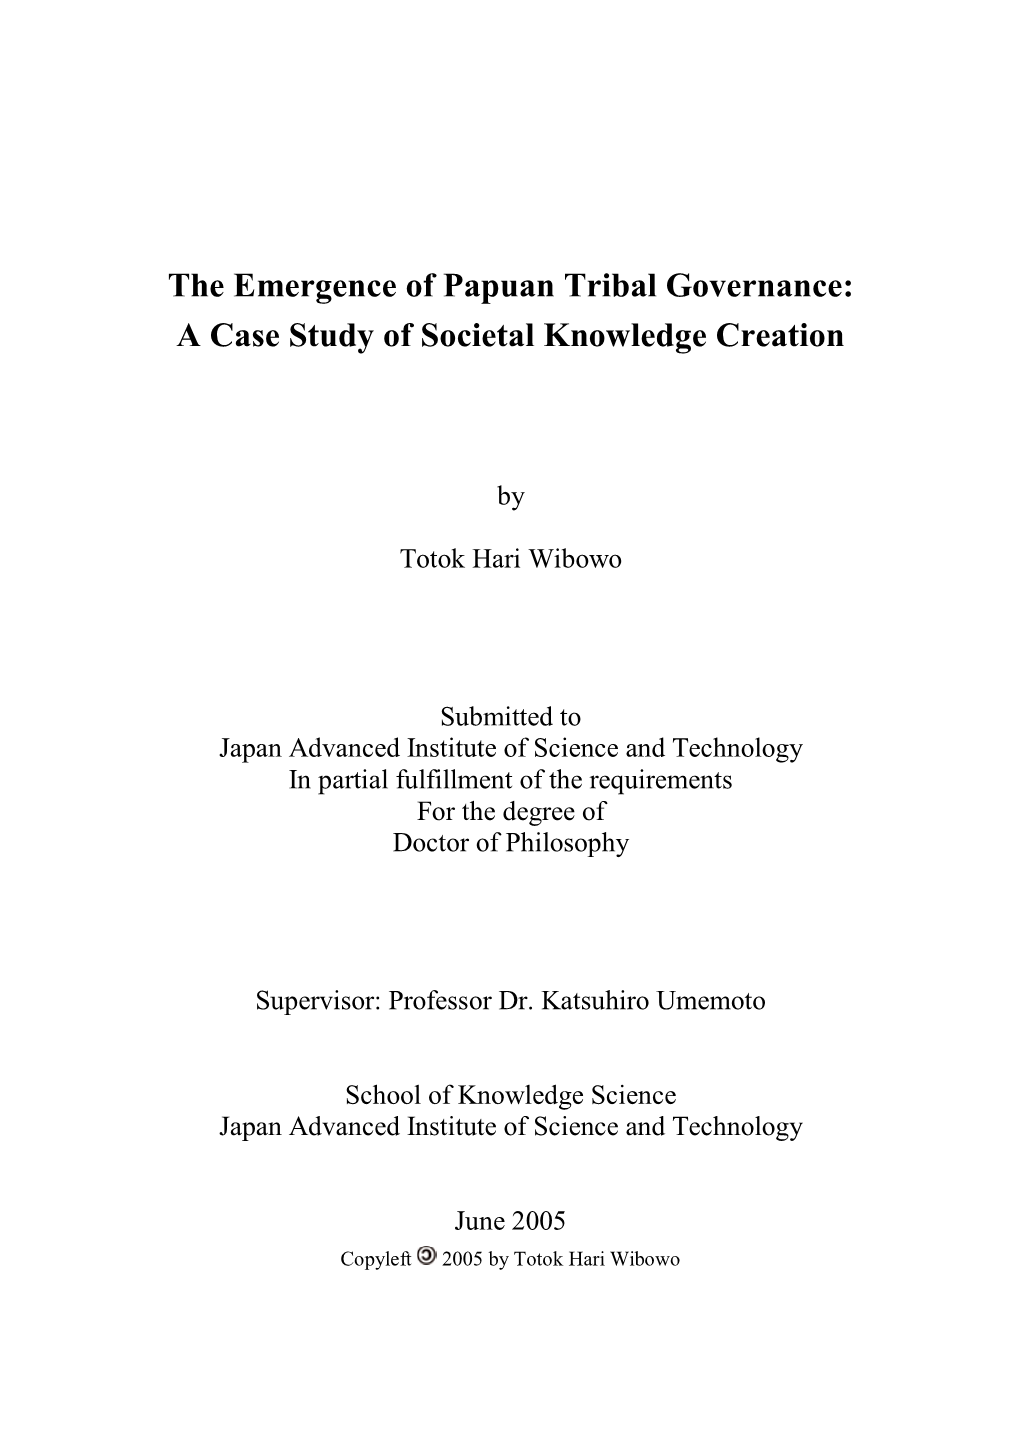 The Emergence of Papuan Tribal Governance: a Case Study of Societal Knowledge Creation